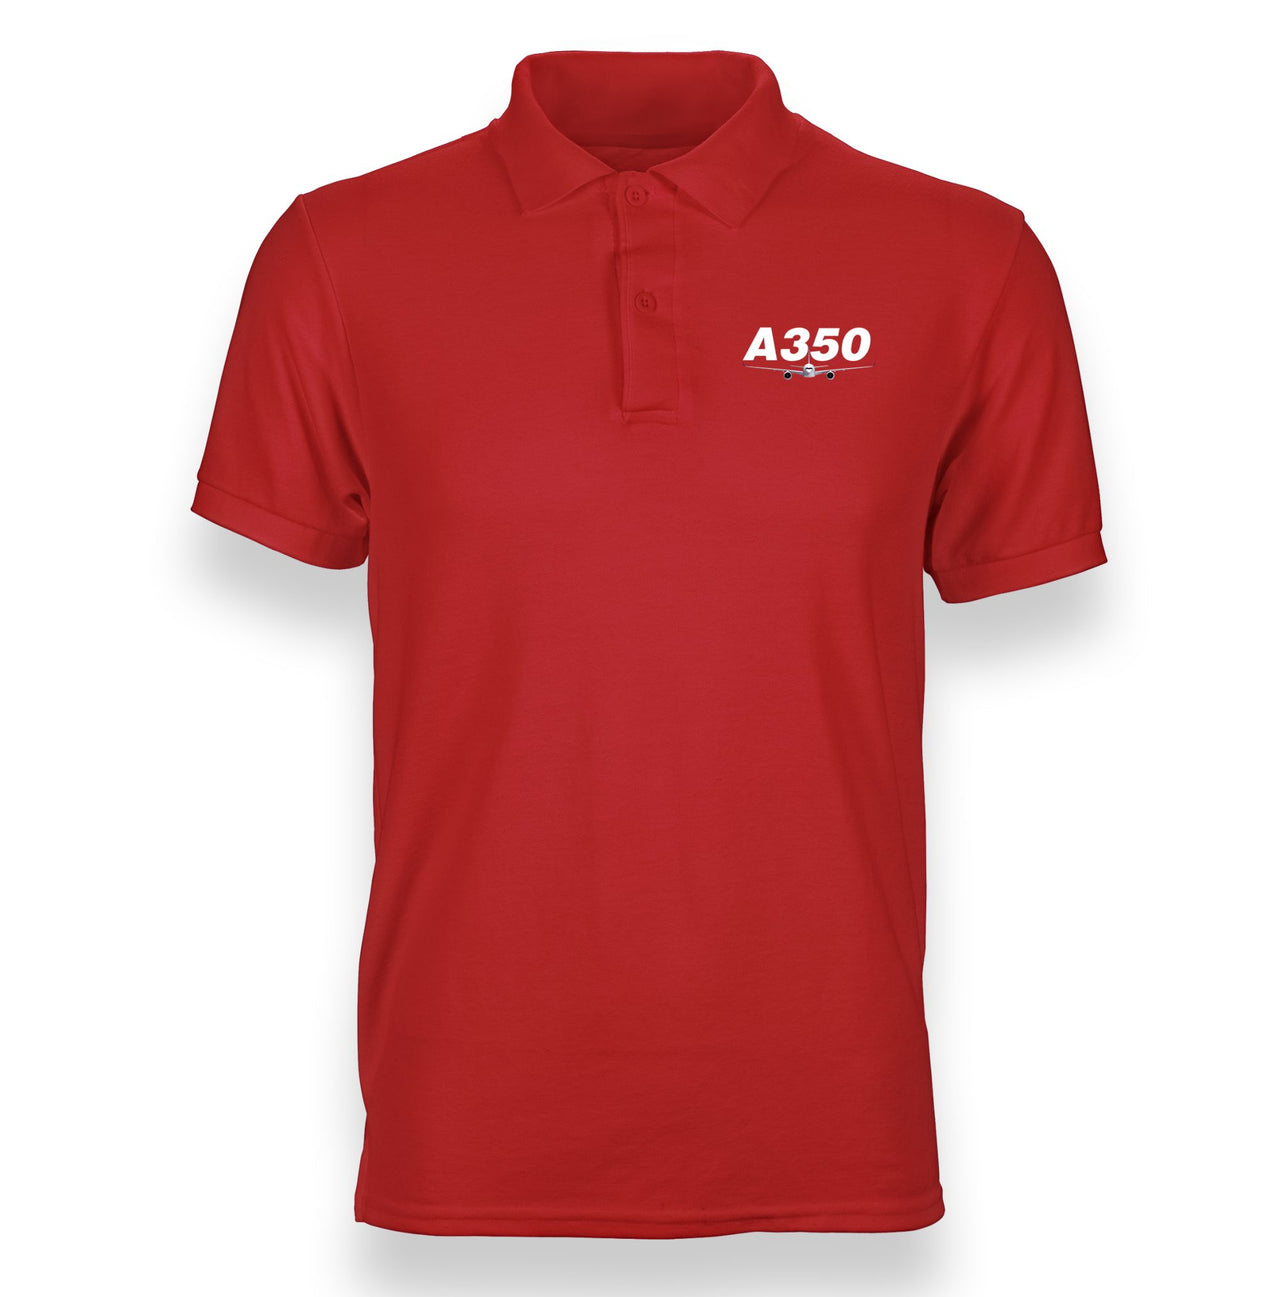 Super Airbus A350 Designed "WOMEN" Polo T-Shirts